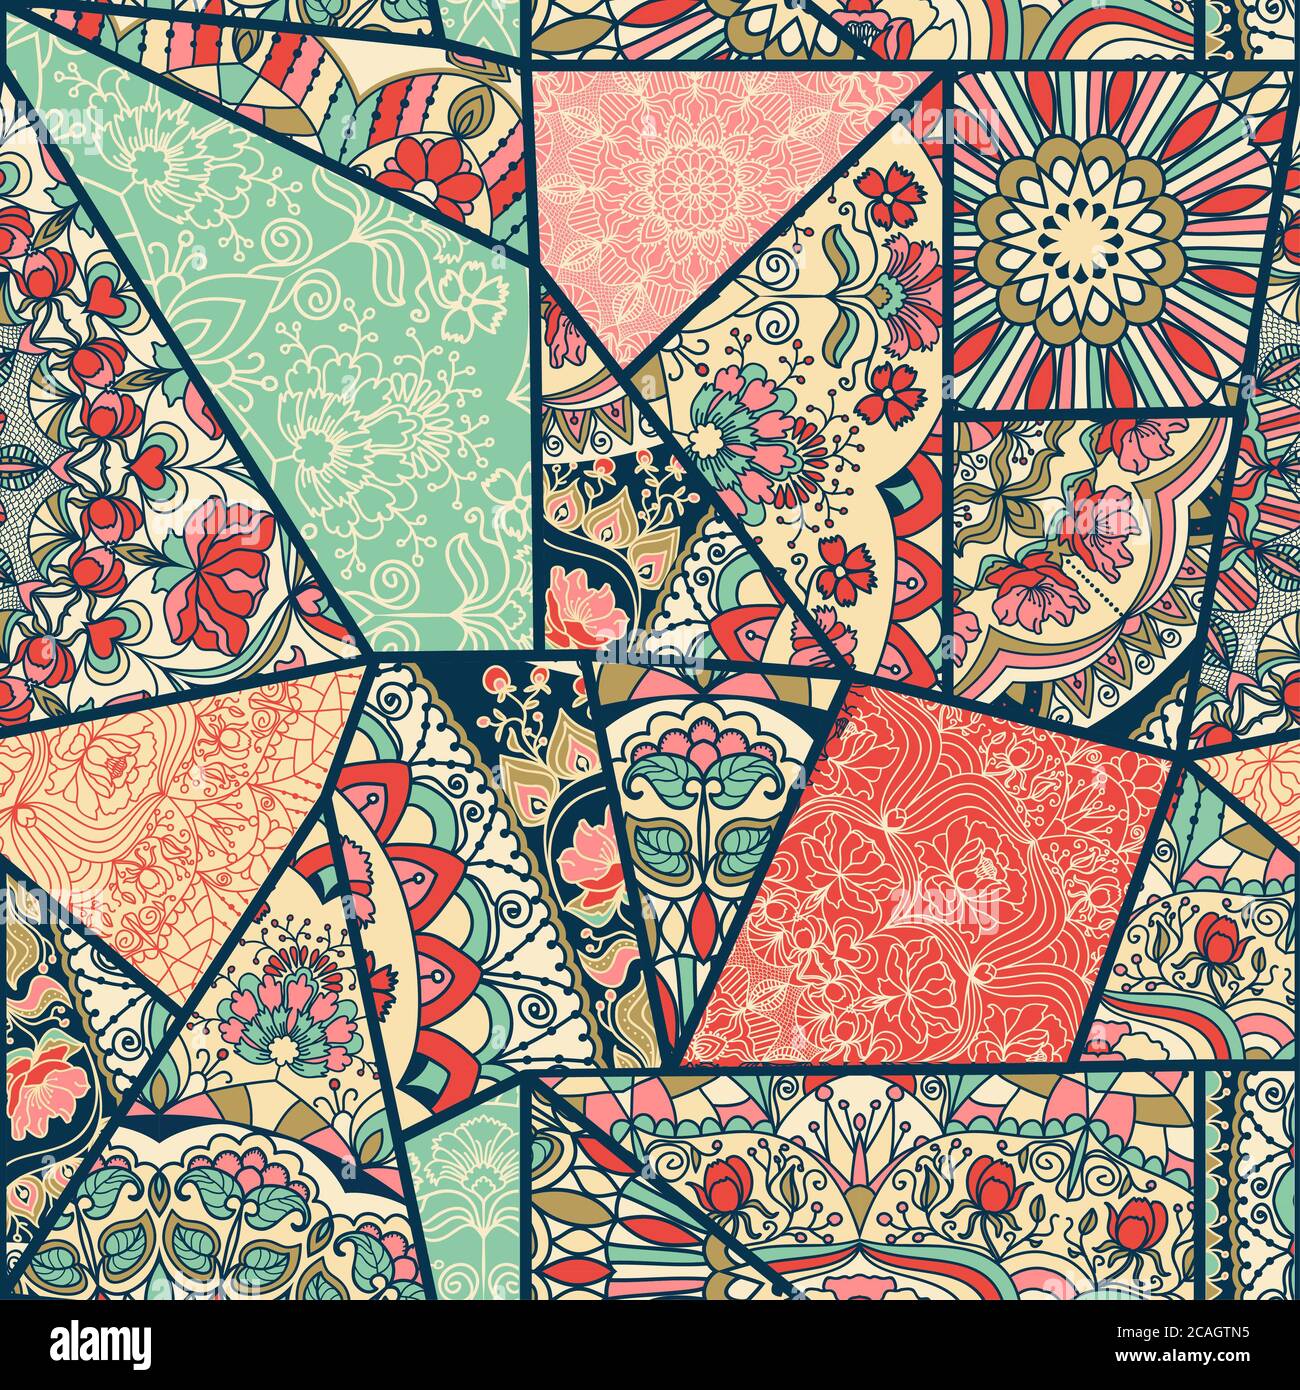 Seamless abstract colorful patchwork pattern. Vintage decorative elements. Hand drawn background in retro colors Stock Photo